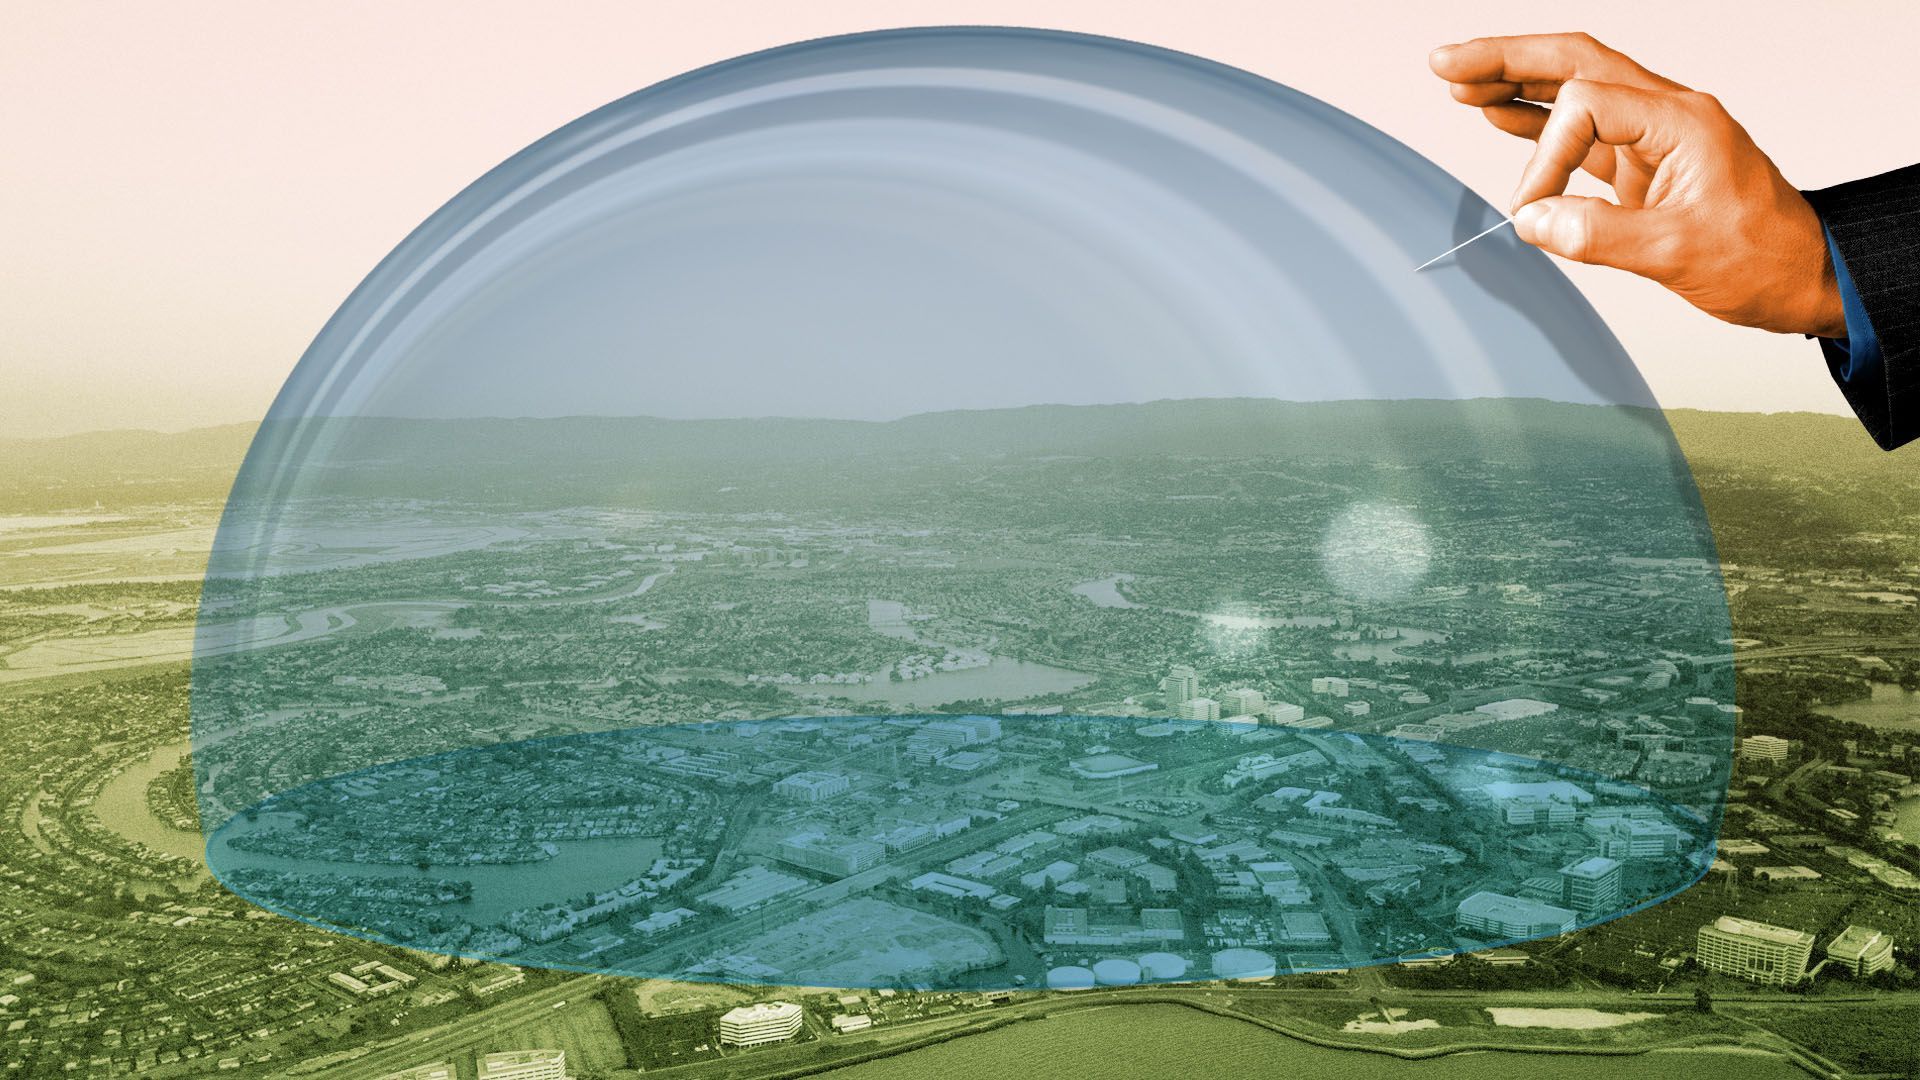 Photo illustration of a bubble over Silicon Valley with a hand about to pop it